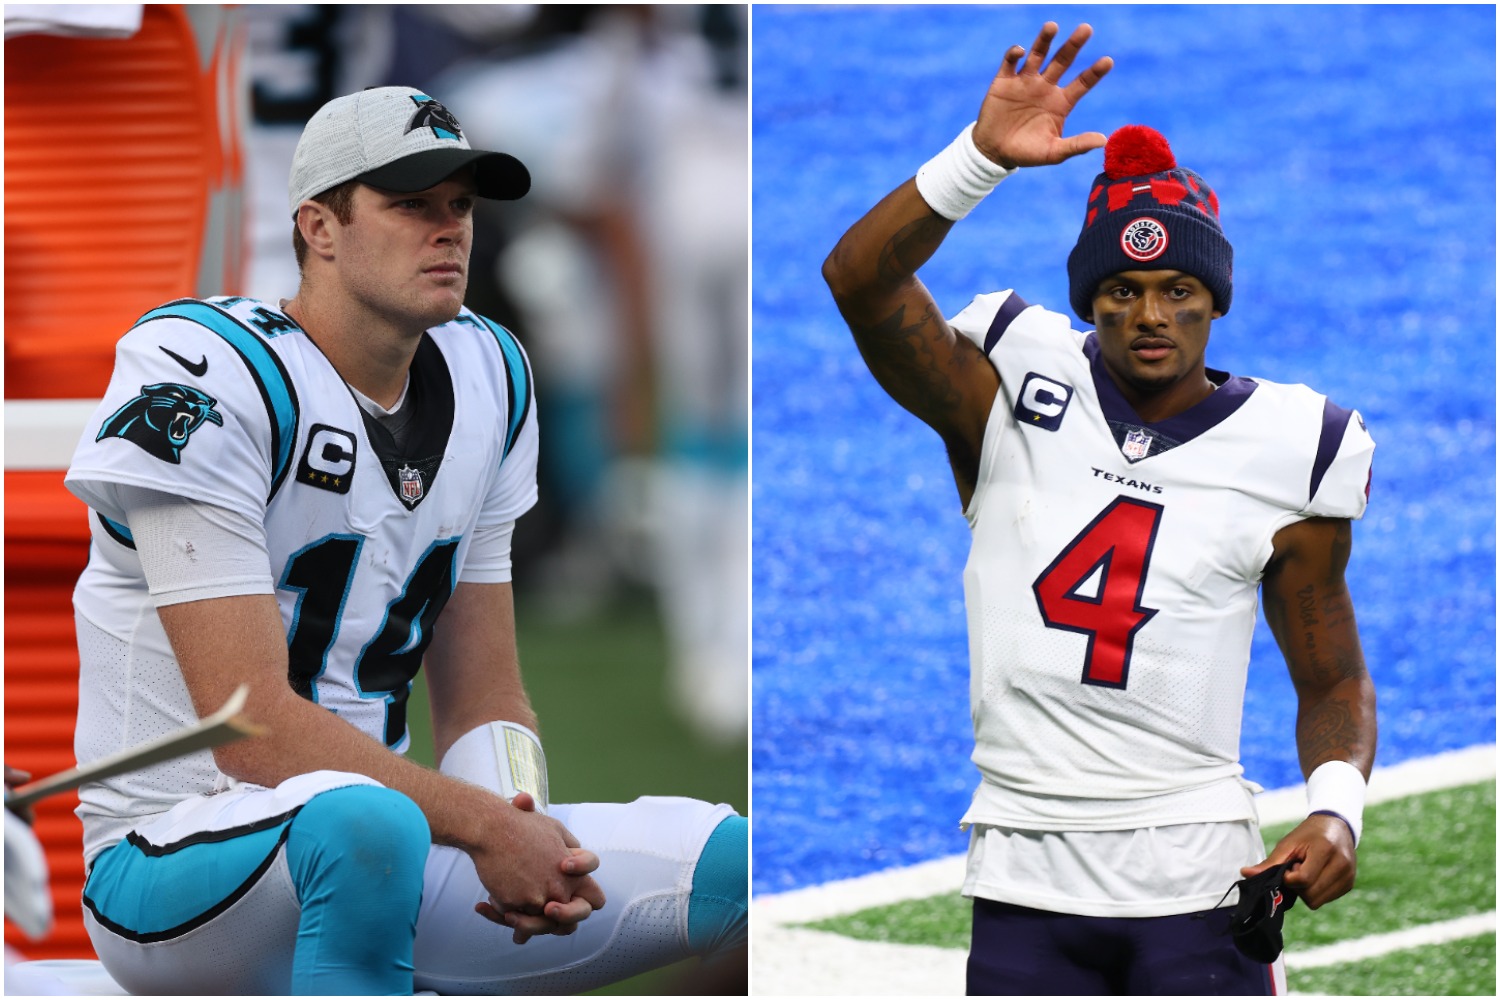 A Nightmare Scenario Has Suddenly Forced the Panthers to Change Their Minds About Bringing Deshaun Watson to Carolina